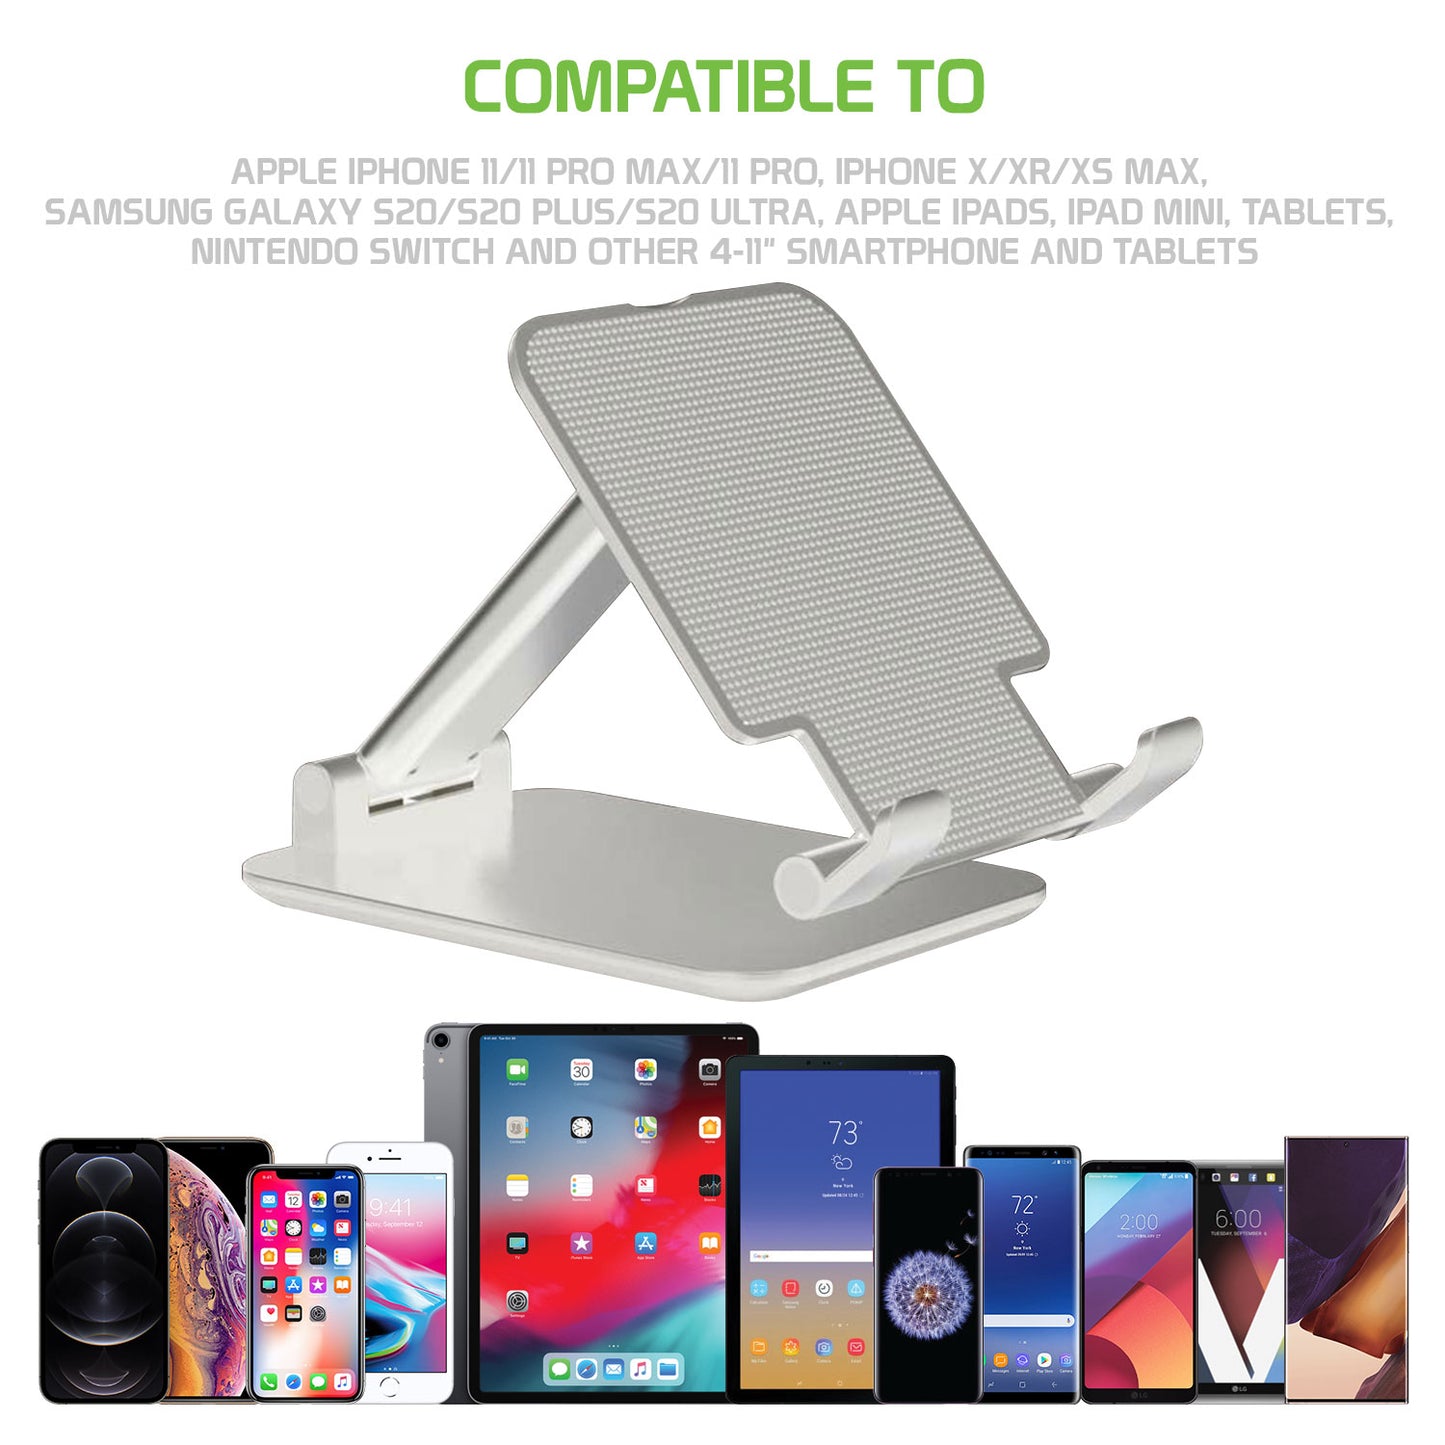 PHTAB60WT - Smartphone & Tablet Desktop Stand, Fold-able Adjustable with Non-Slip Rubberized Grips and Weighted Base -White